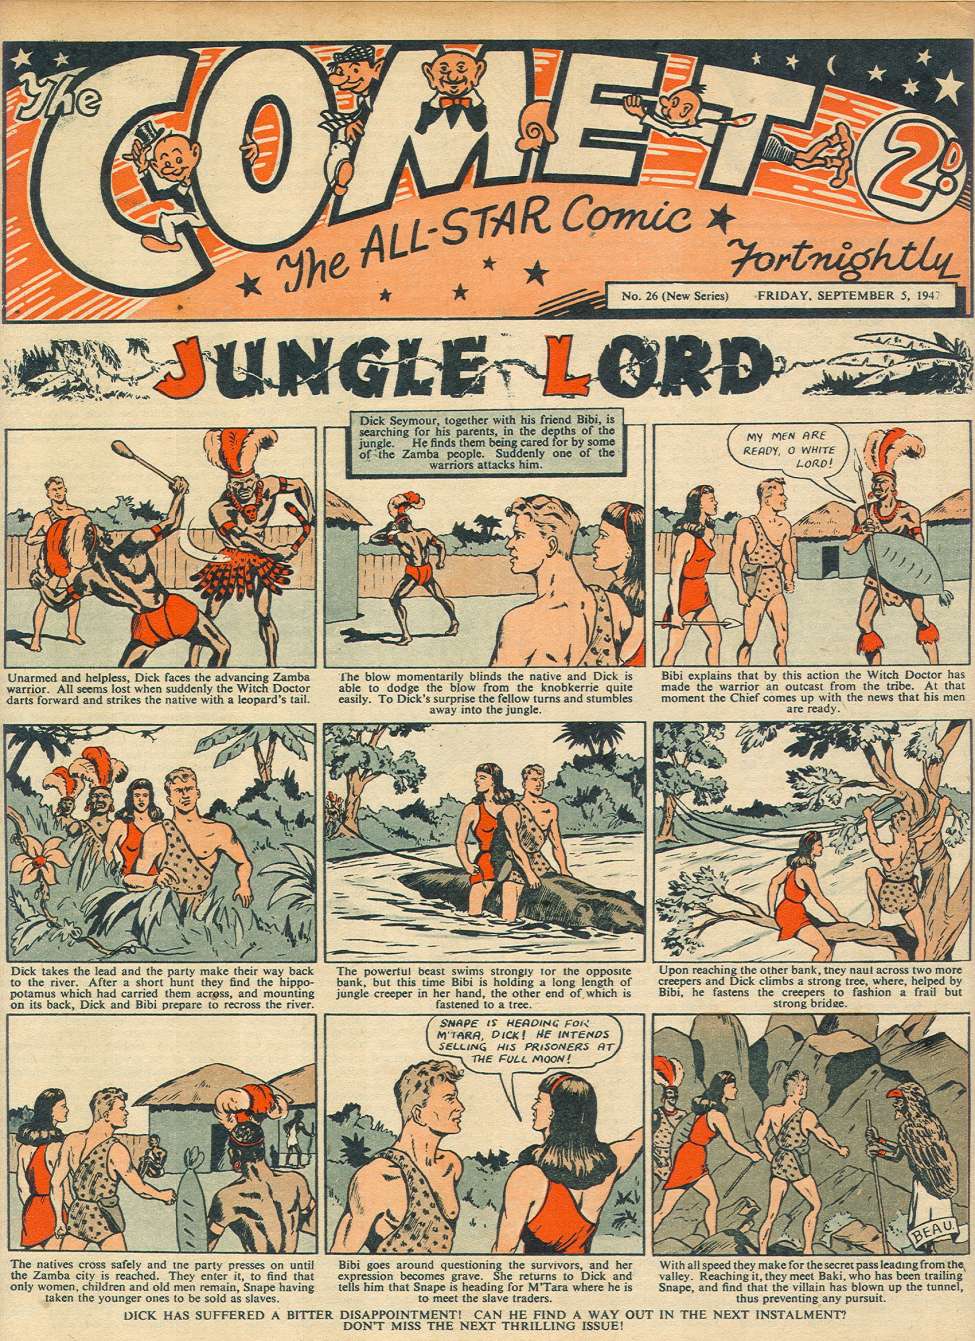 Book Cover For The Comet 26